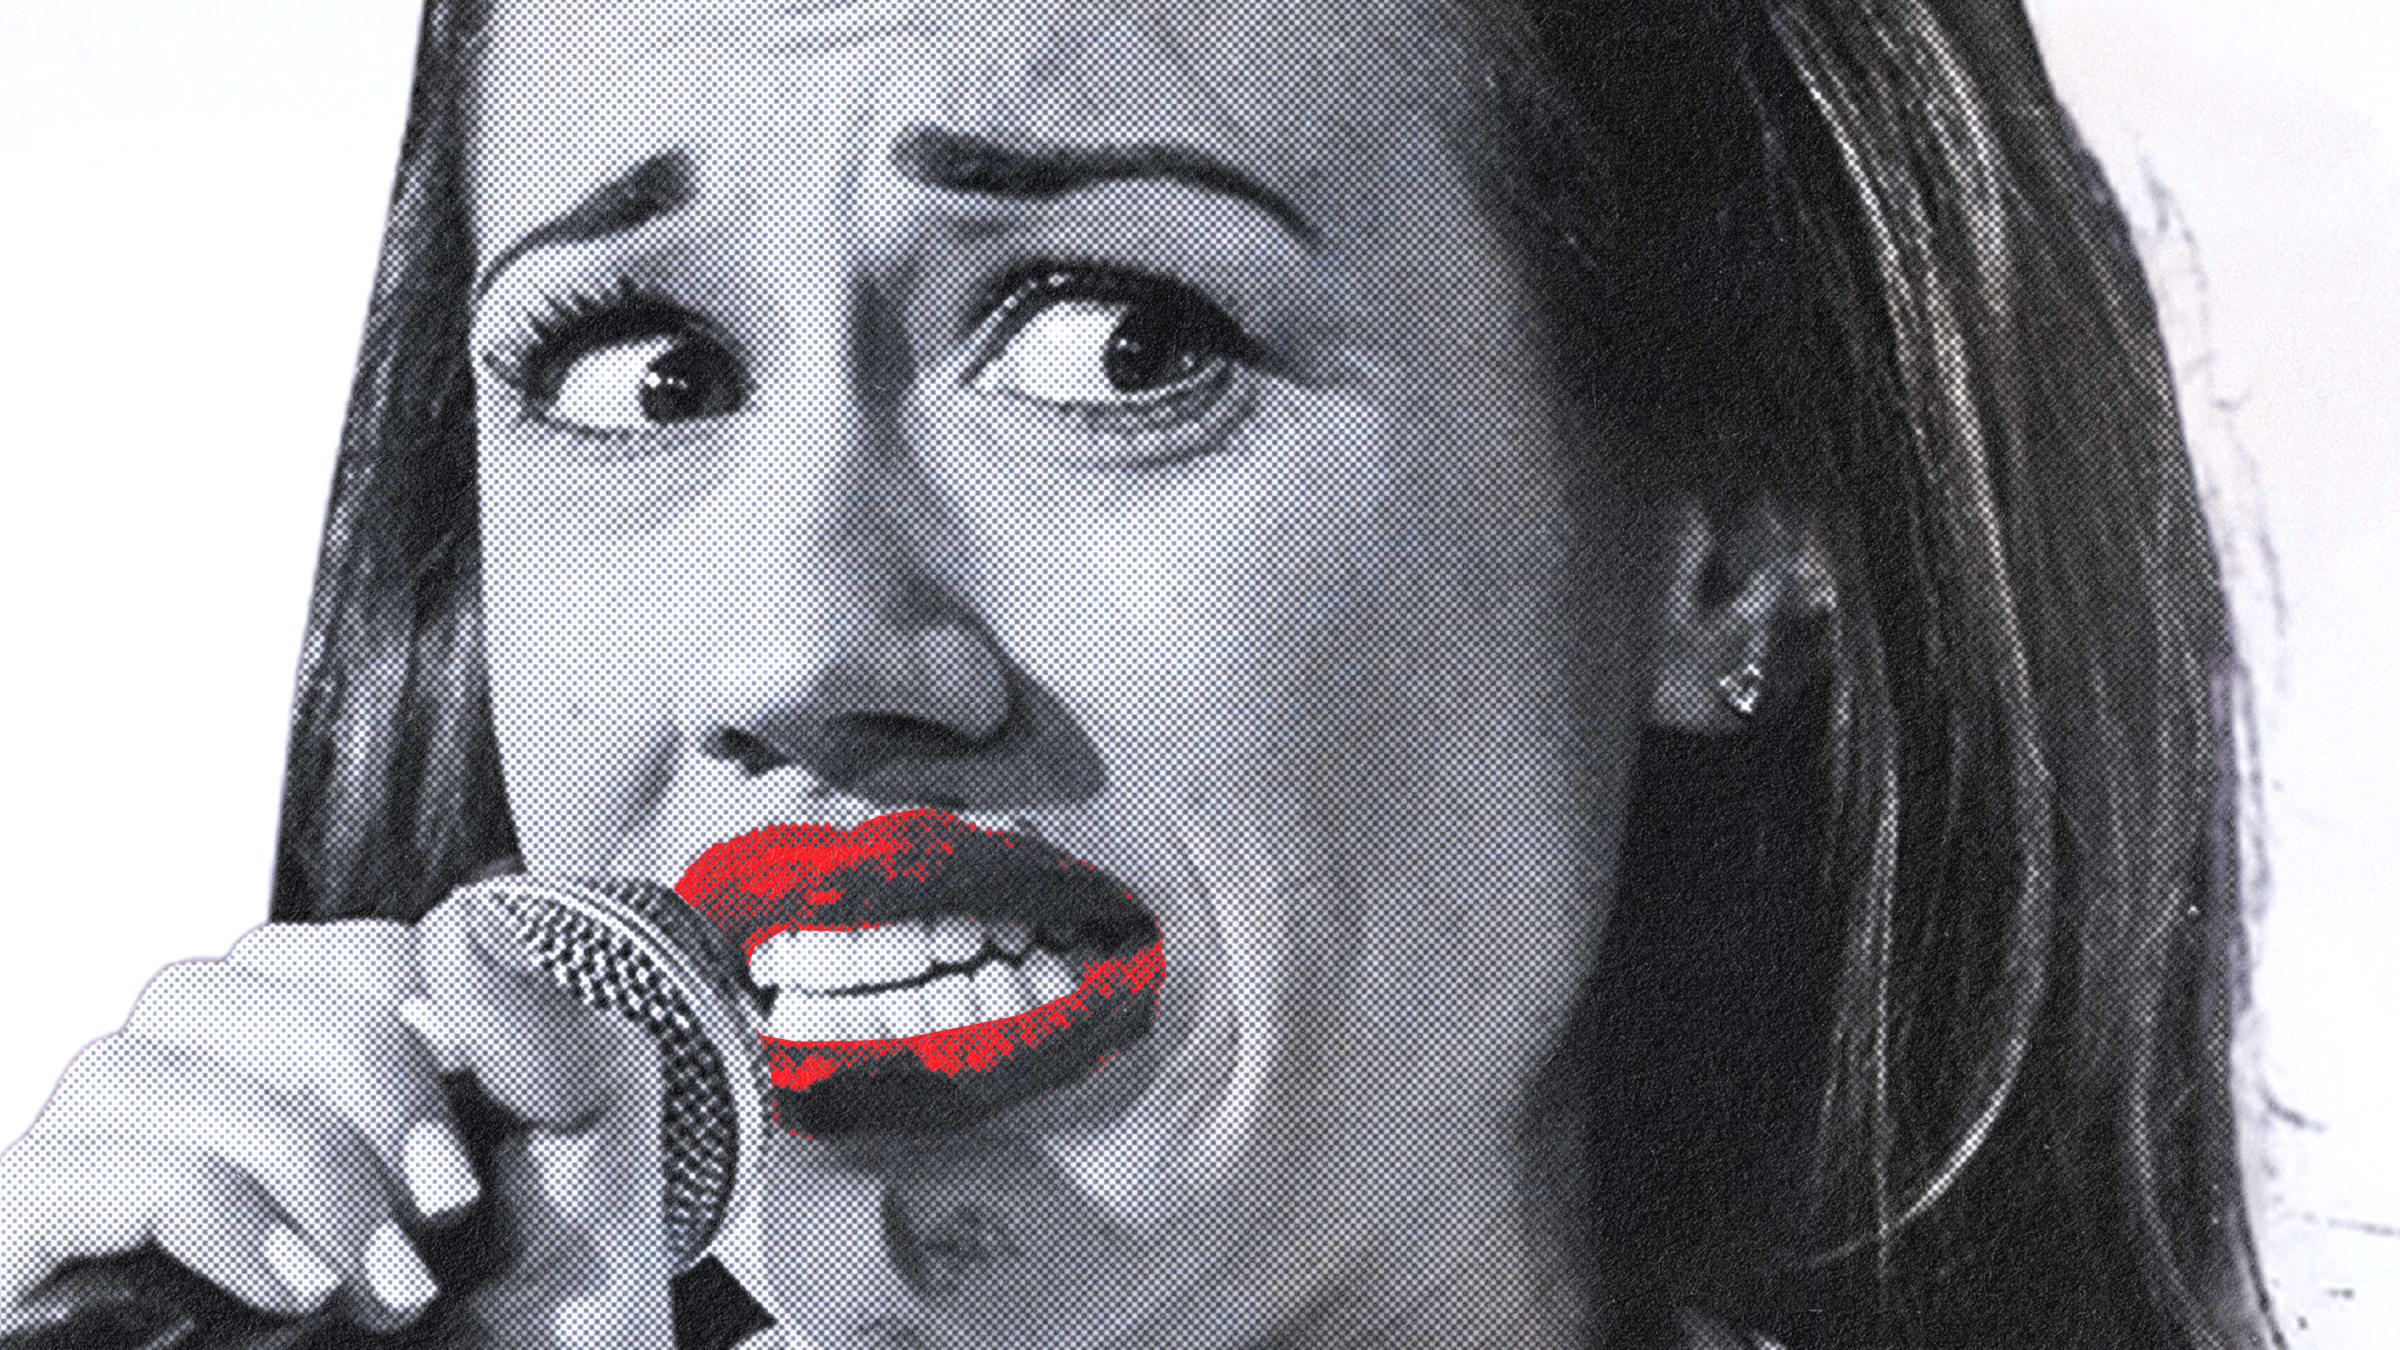 An illustration that includes an image of Colleen Ballinger aka Miranda Sings